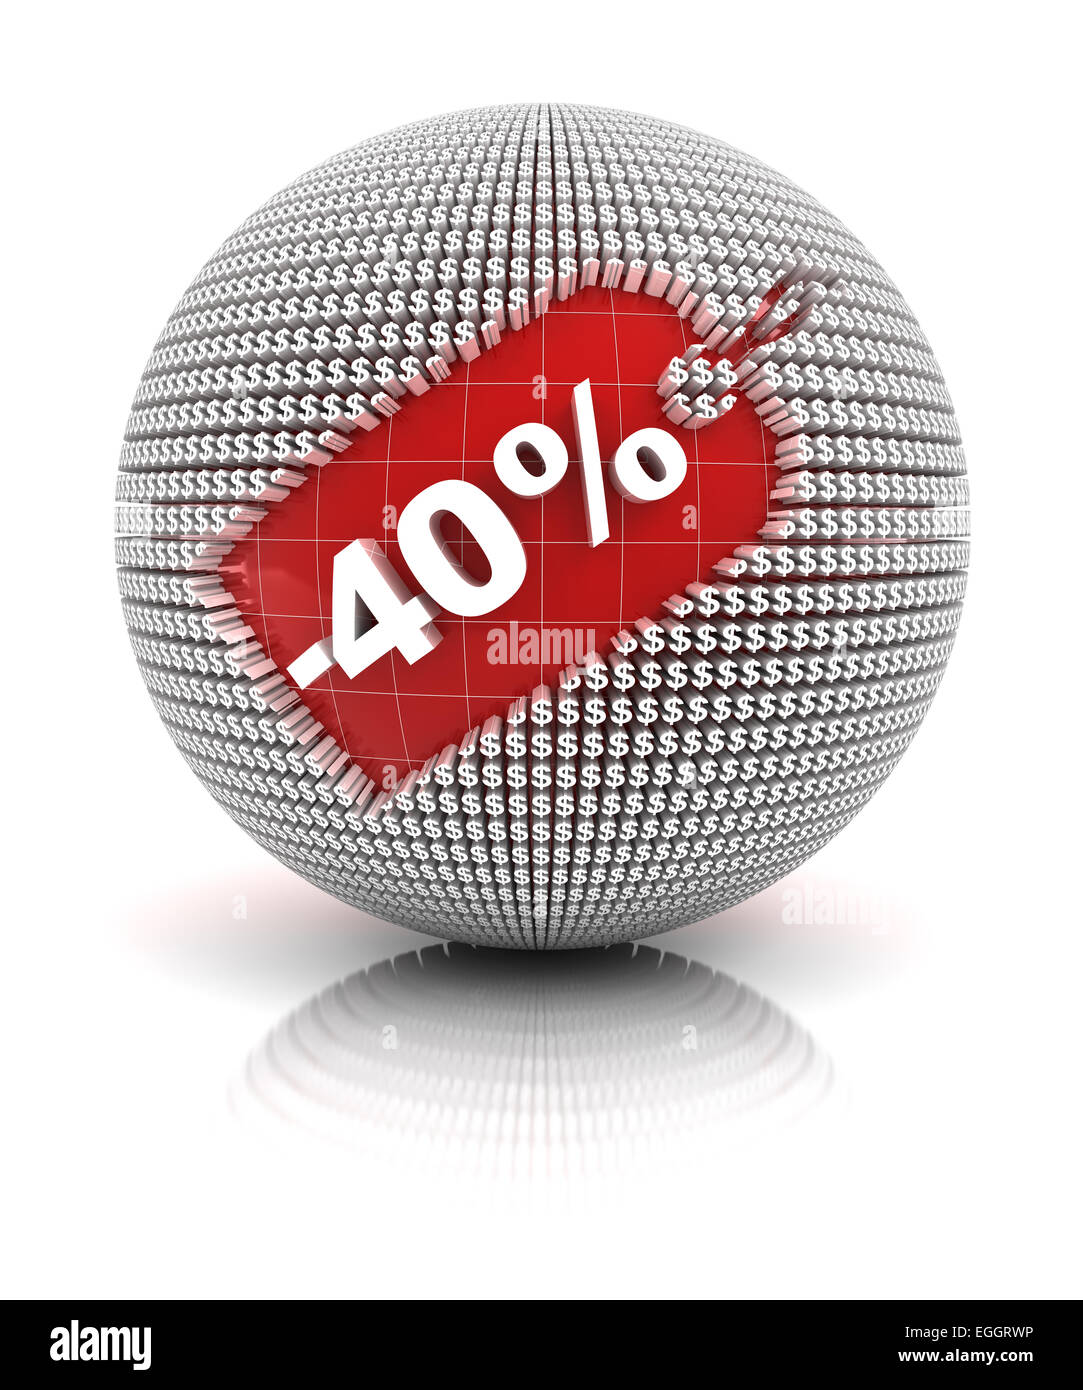 40 percent off sale tag on a sphere Stock Photo